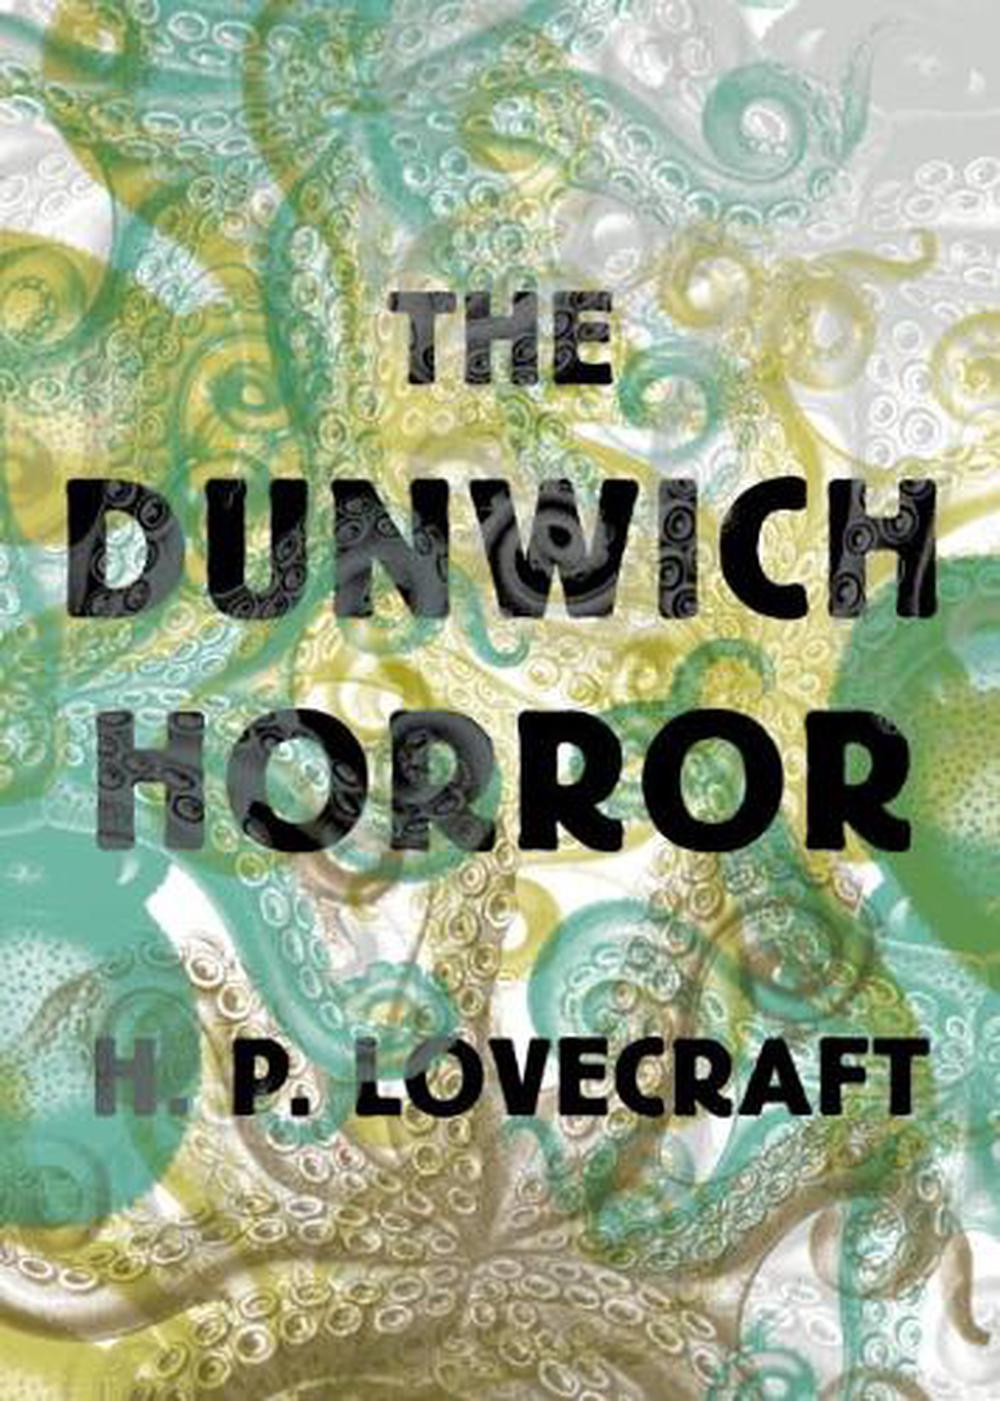 The Dunwich Horror by H.P. Lovecraft